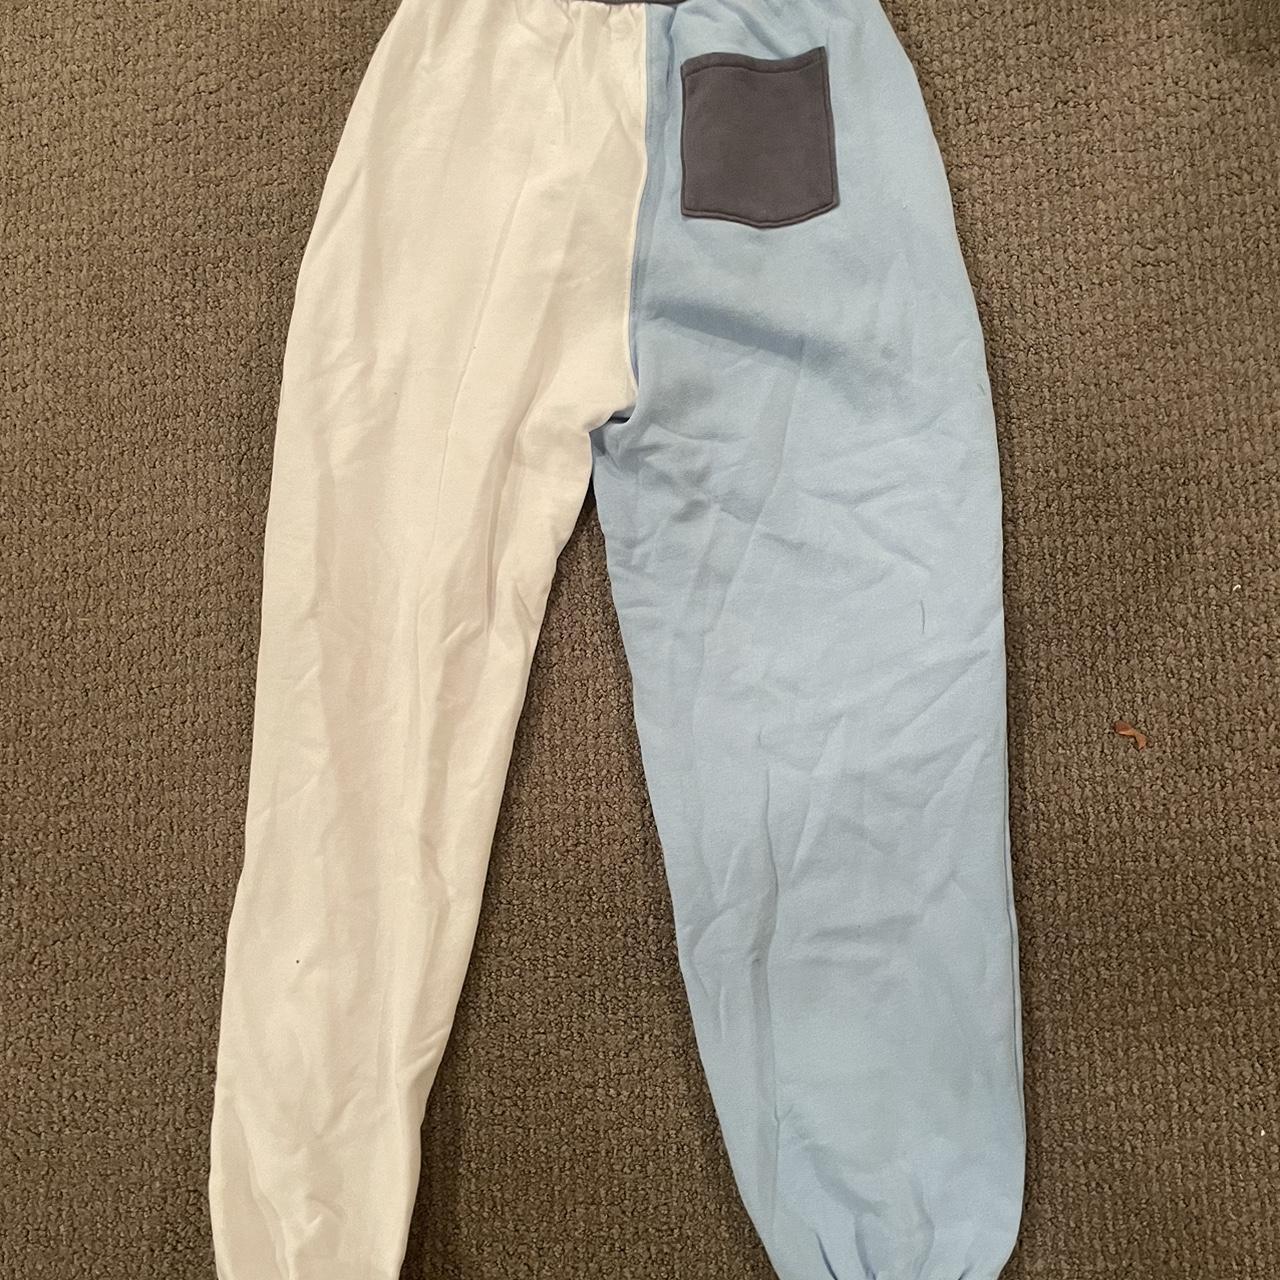 Hollister sweatpants size XXS. These have never been - Depop